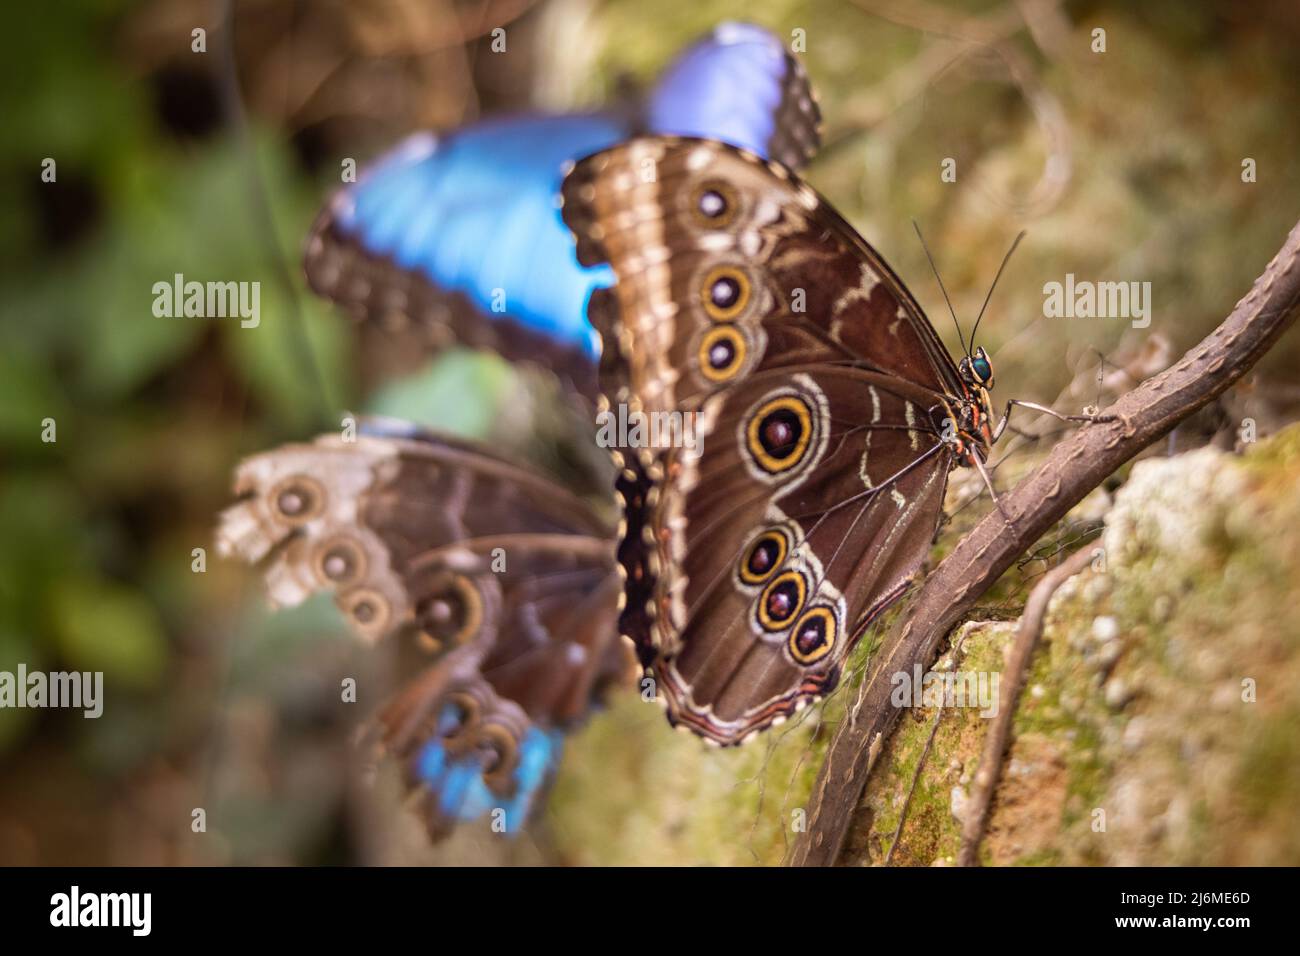 A flock of owl butterflies are perched on creepers, some with folded and some with spread wings Stock Photo